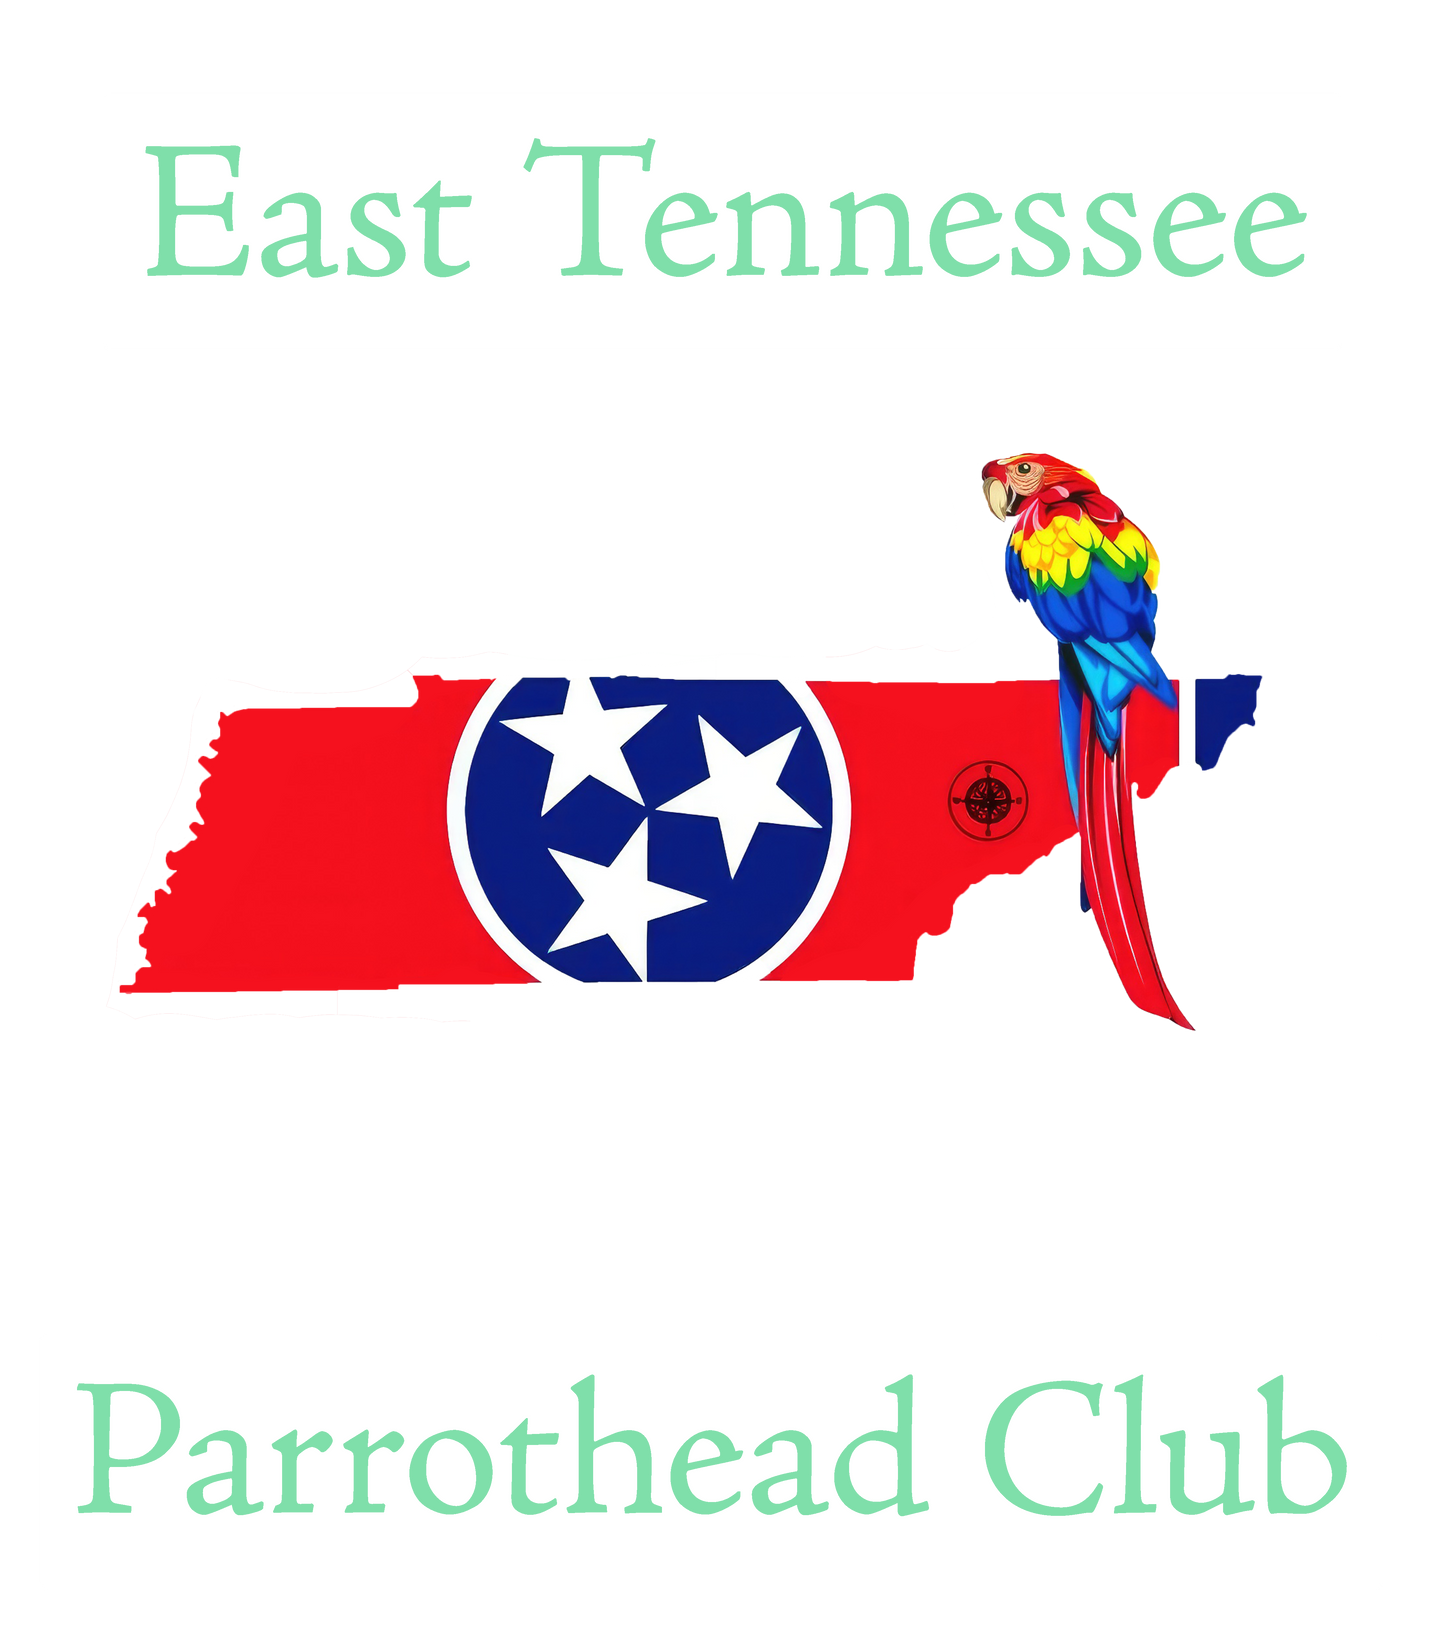 Close-up image of the East  Tennessee Parrothead Club logo. Shows the state of Tennessee in red with blue and white stars, and a colorful parrot perched near the top right on the state.